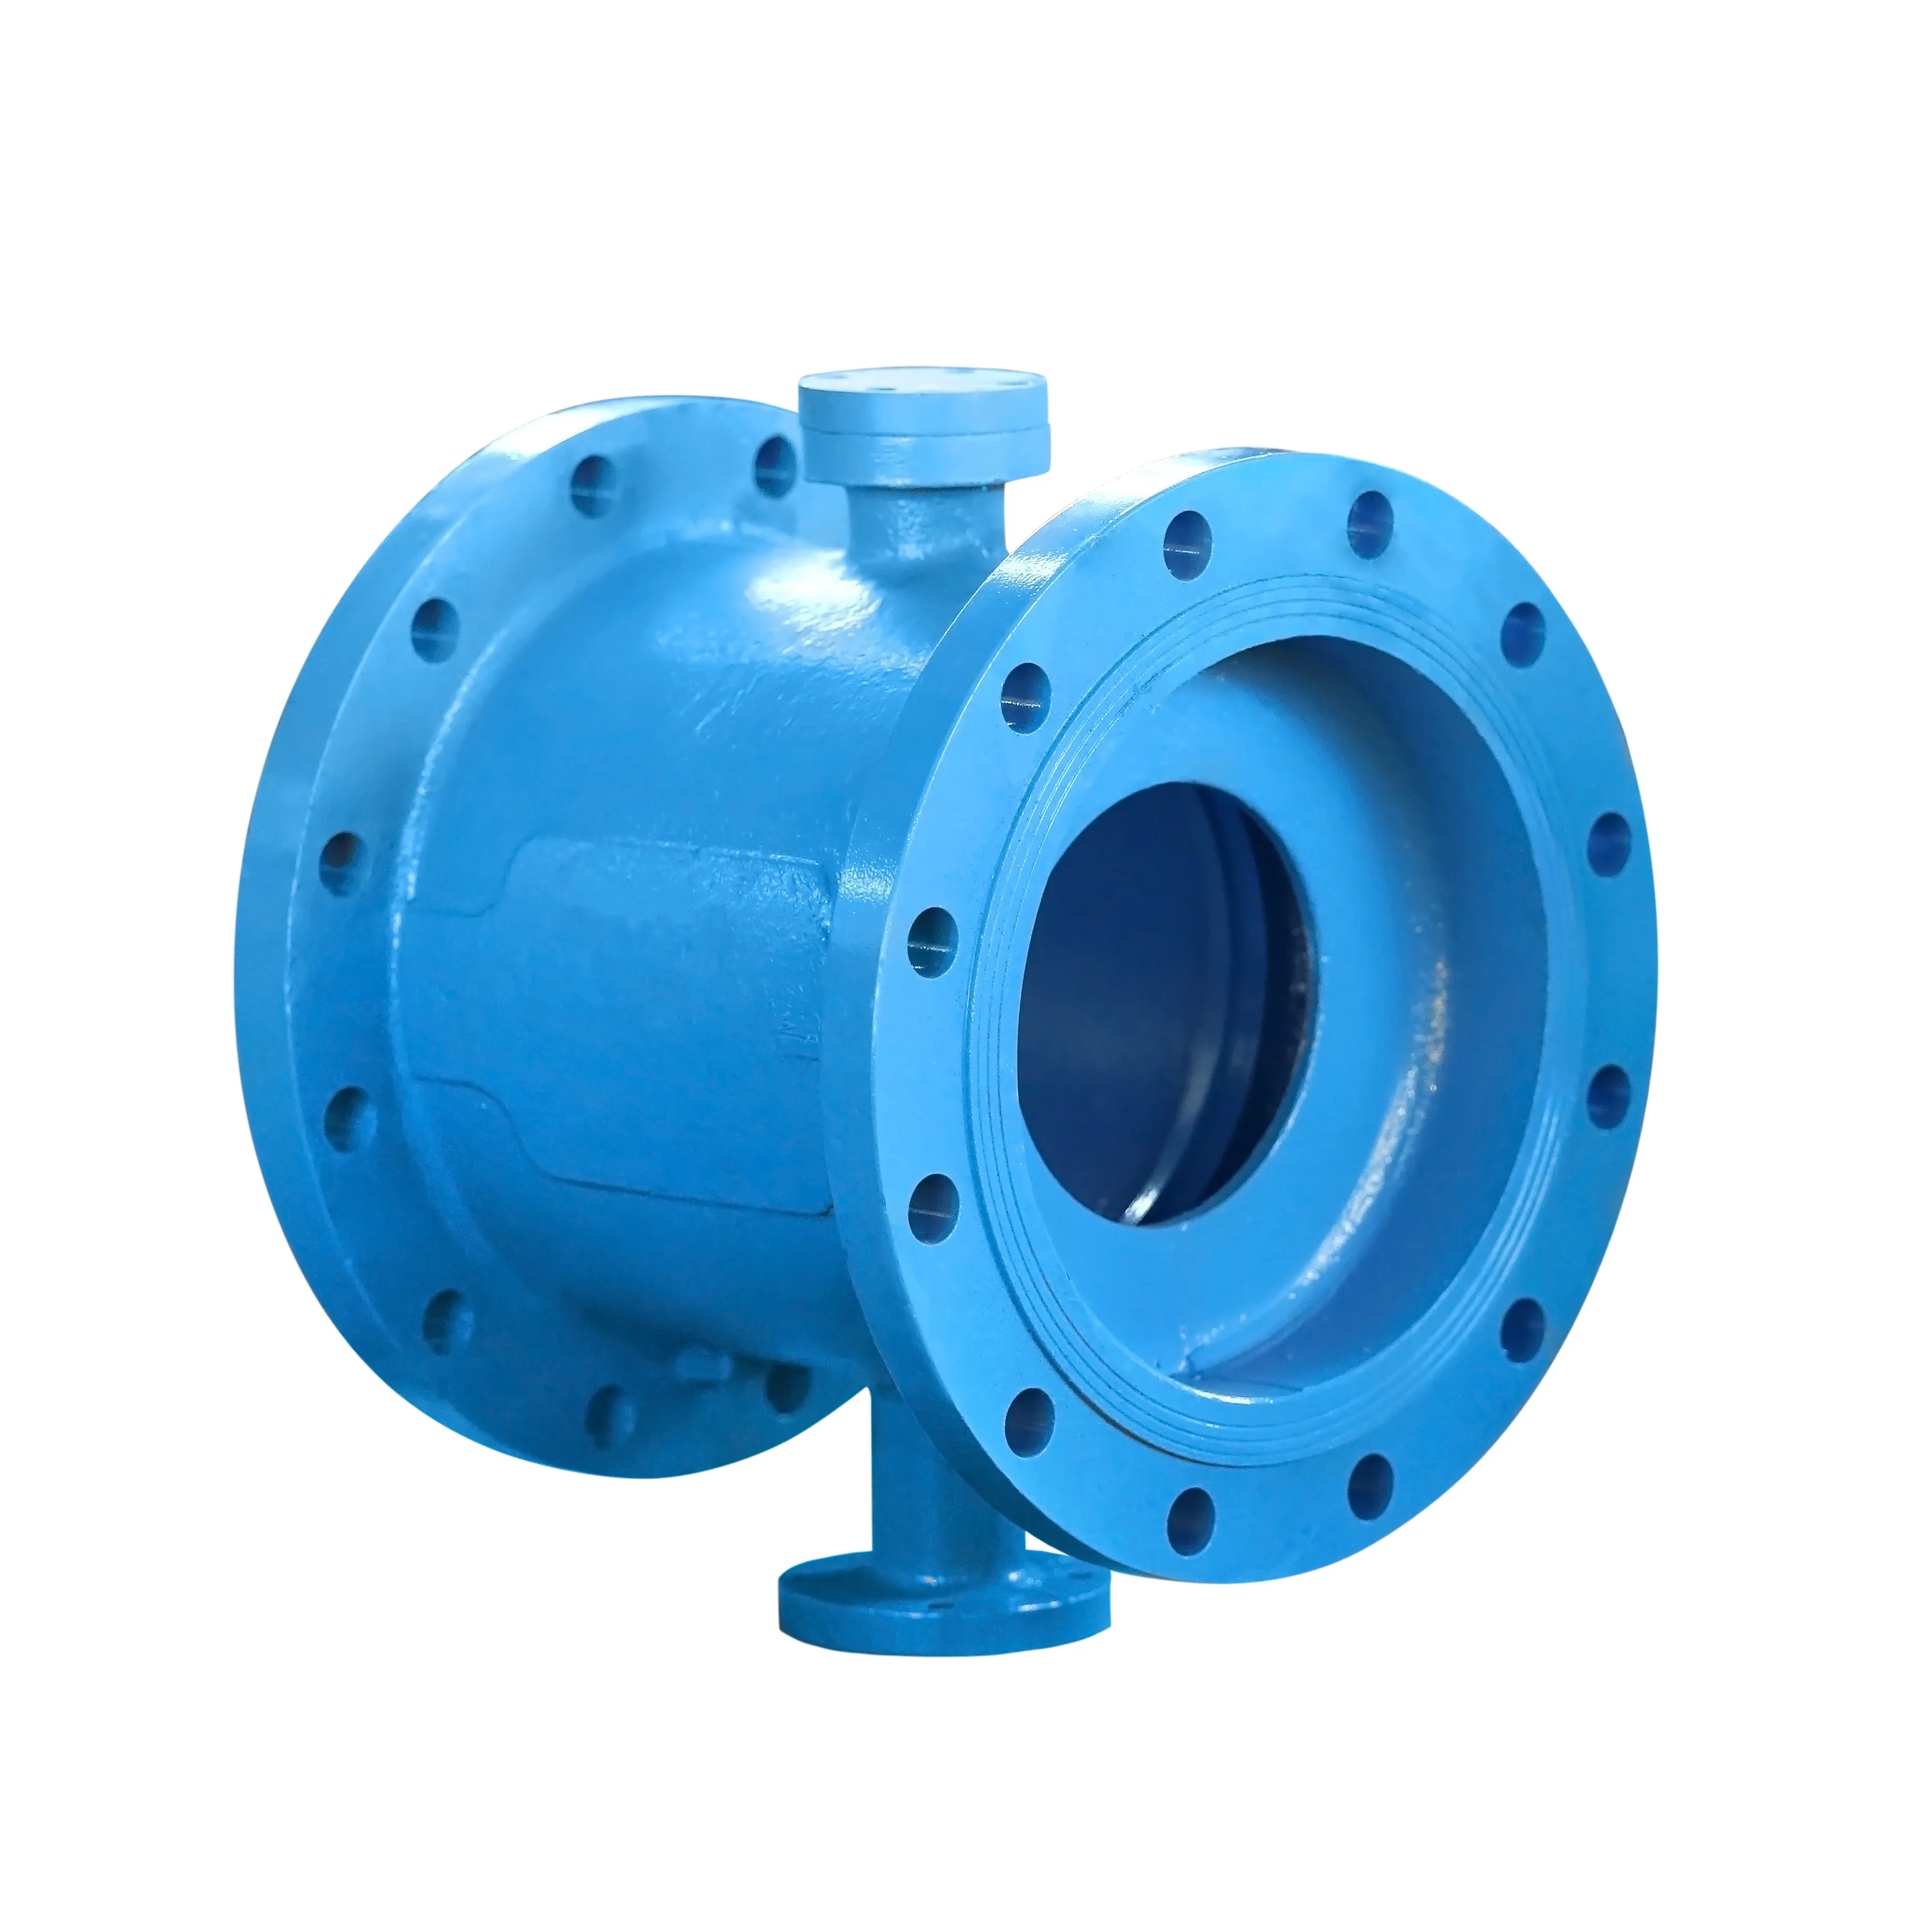 Eccentric Double Flanged Butterfly Valve